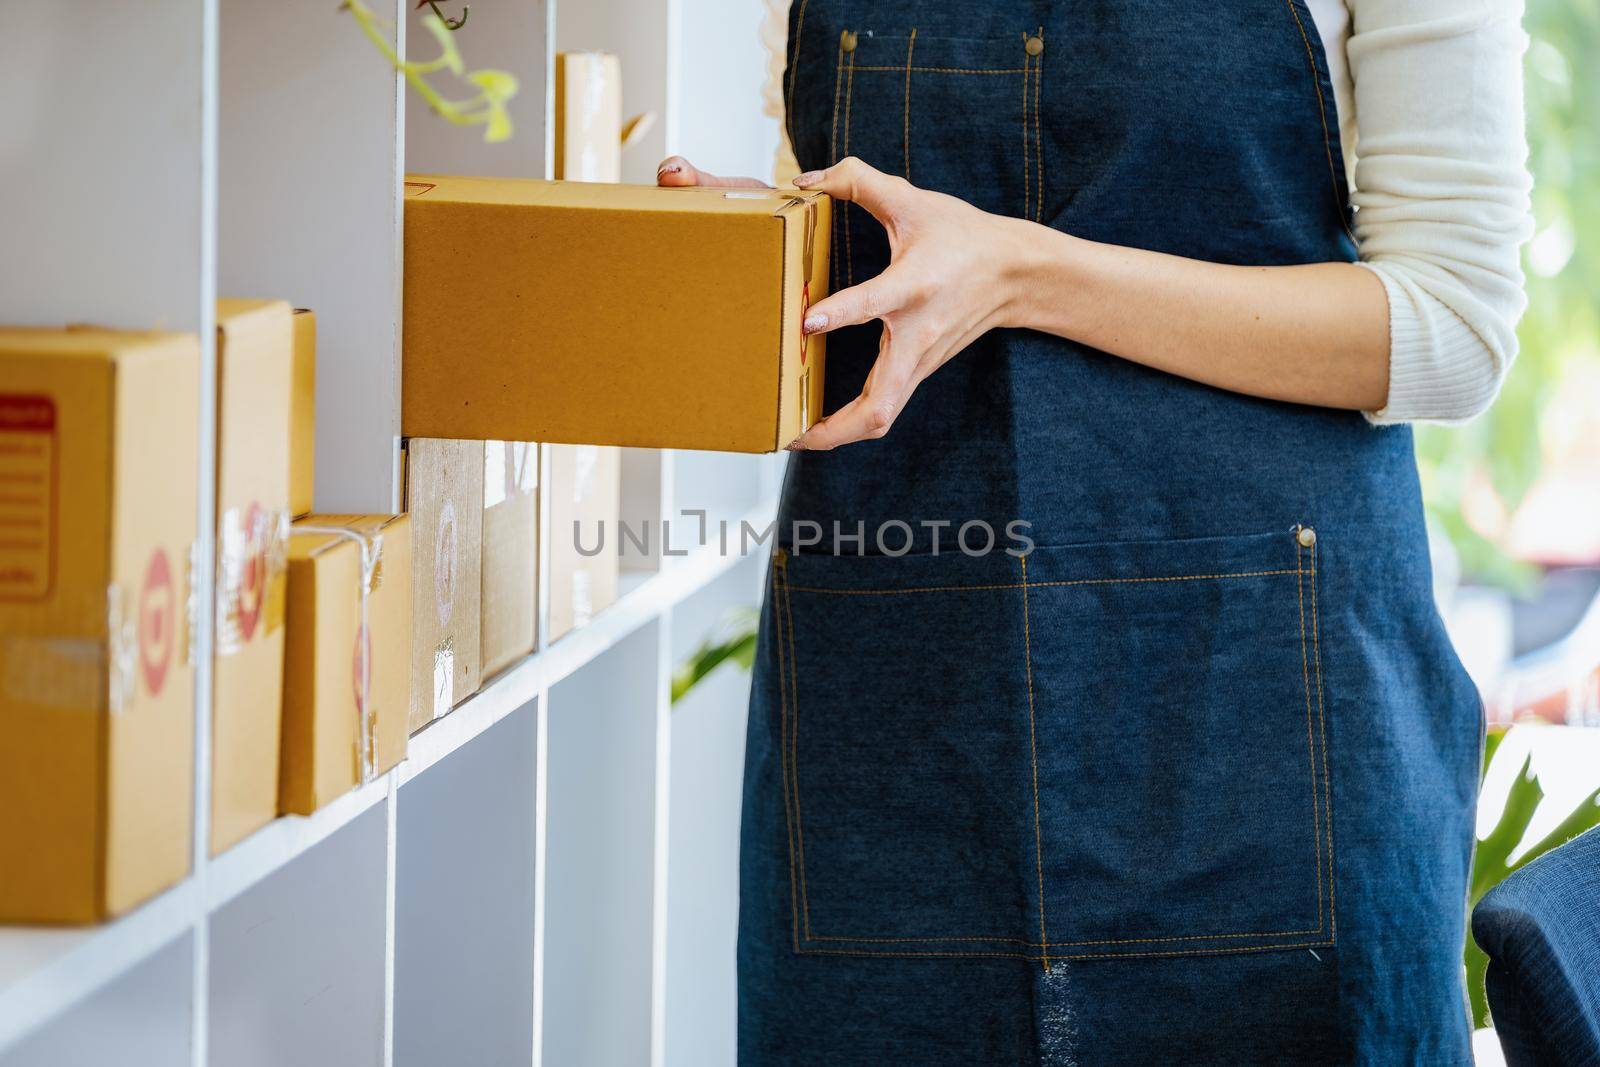 Work from home. happy women selling products online Startup small business owners are picking up parcel boxes to pack customer orders and prepare them for postage